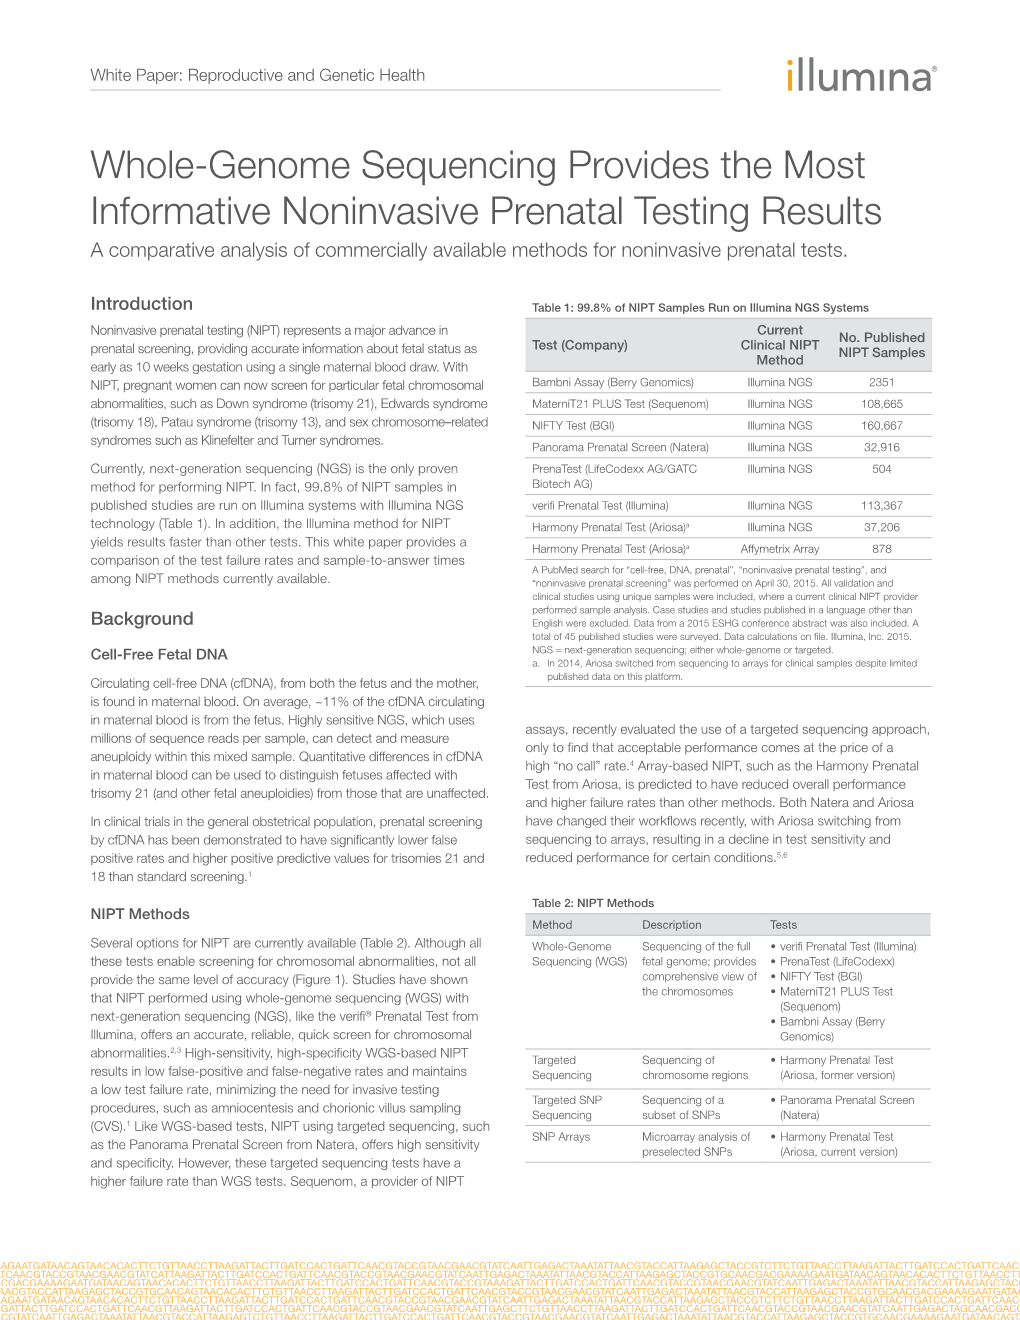 Whole-Genome Sequencing Provides the Most Informative Noninvasive Prenatal Testing Results